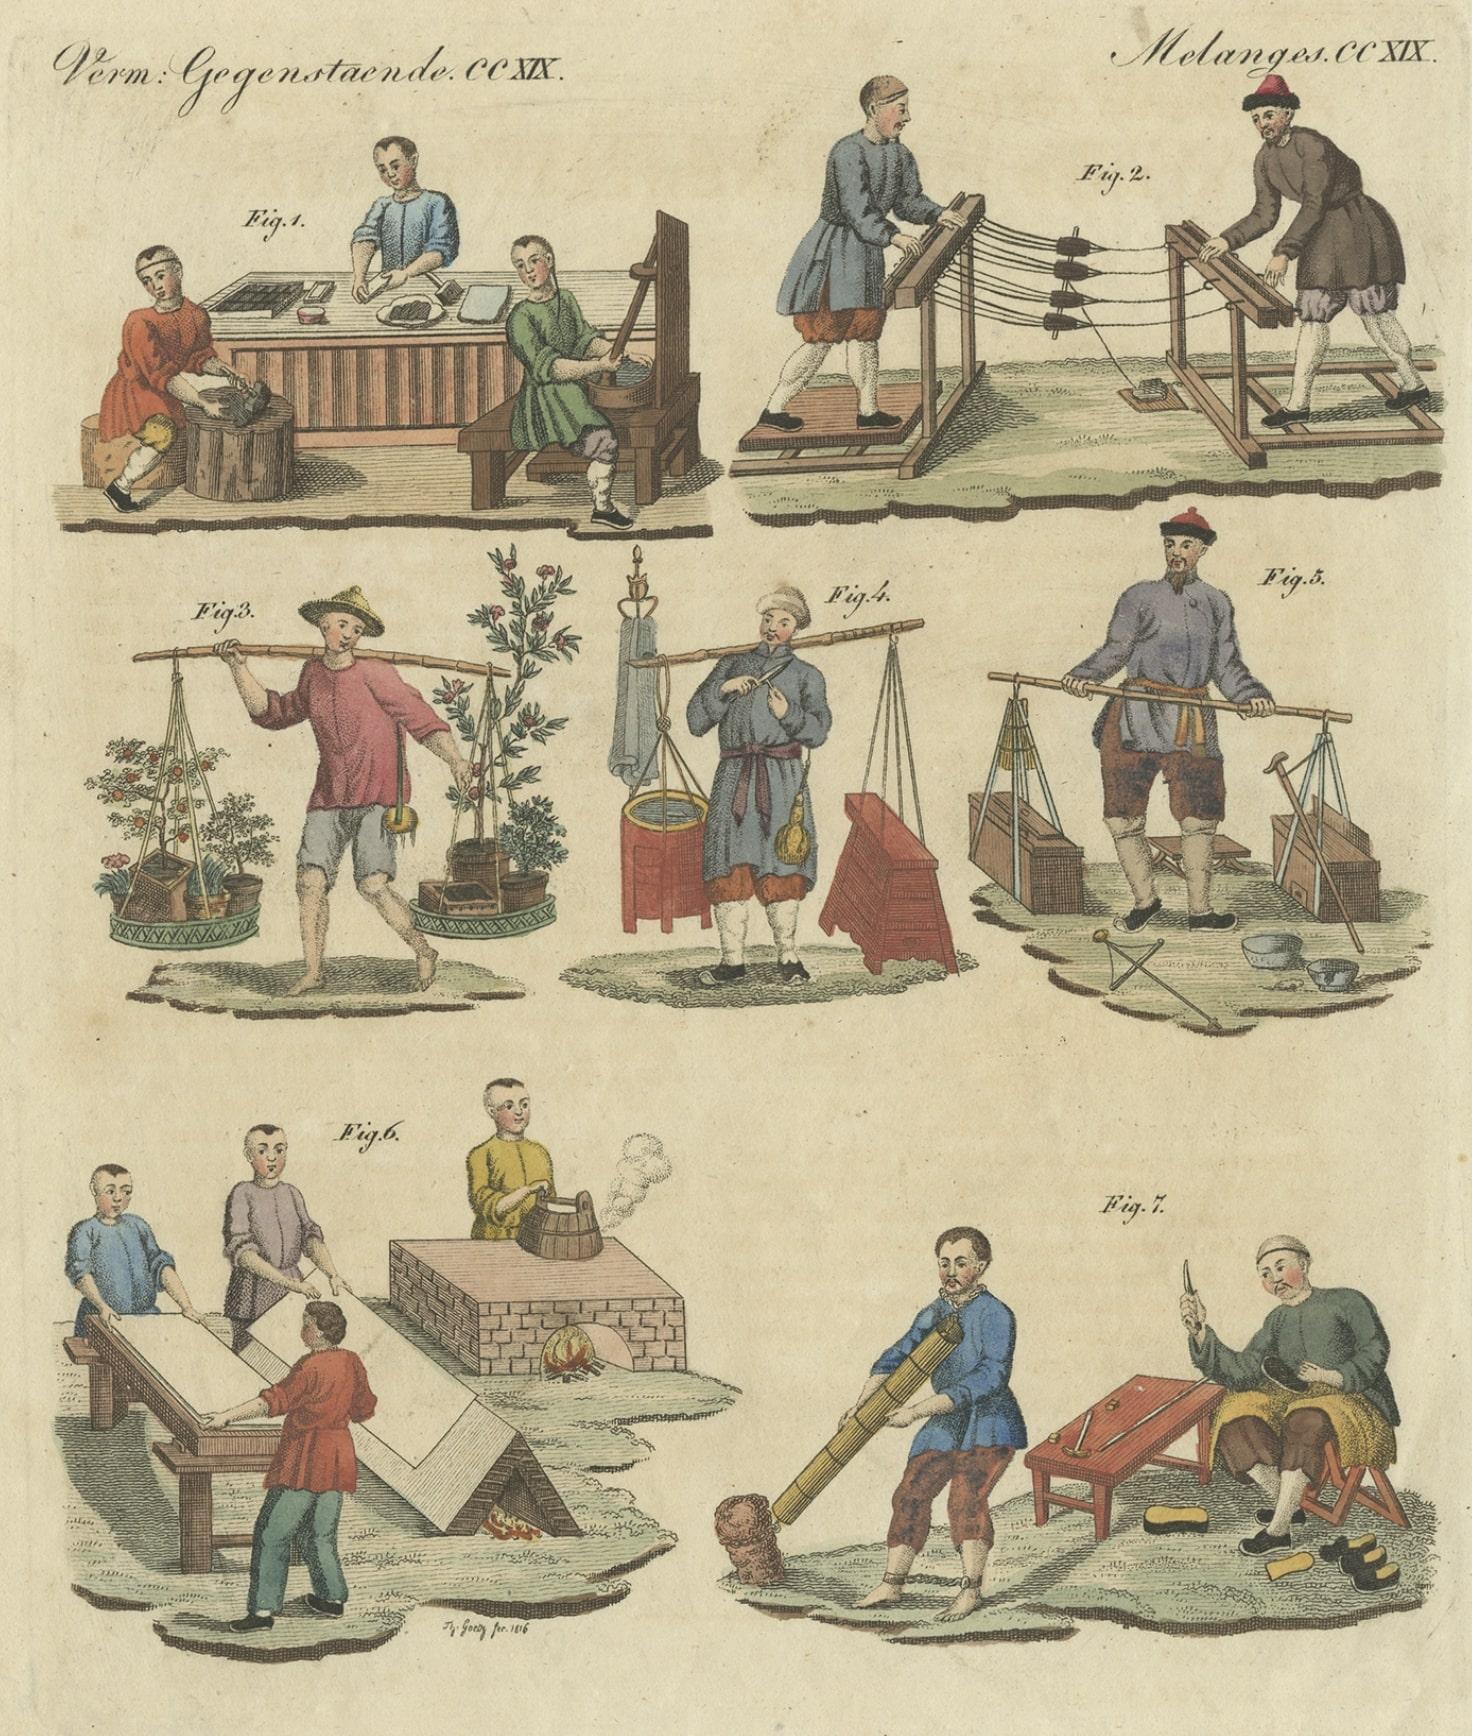 Antique print China titled 'Künste und Handwerke in China'. Beautiful print depicting the fabrication of ink, a ropemaker, a flower dealer, a hair dresser and many other arts and crafts. Originates from 'Bilderbuch für Kinder'.

Artists and